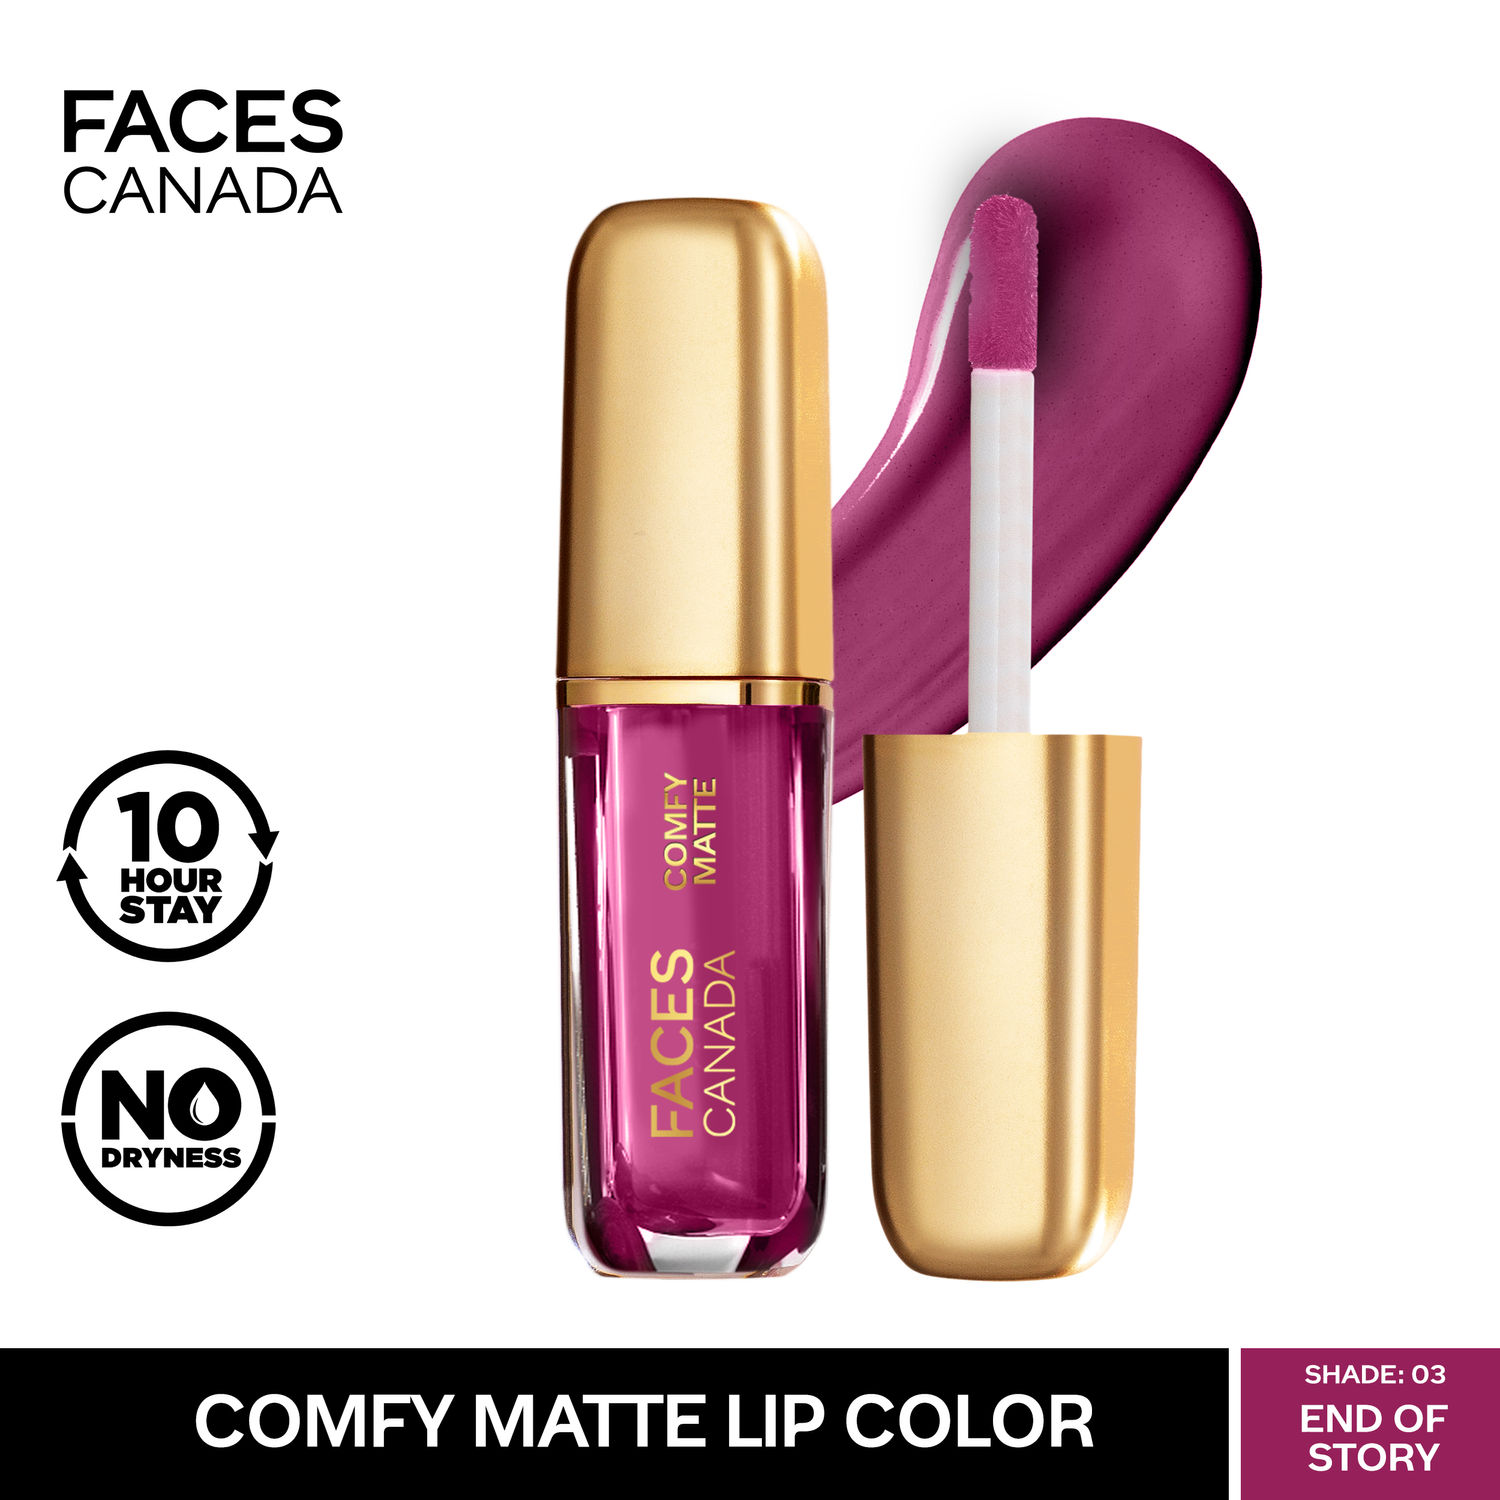 Buy FACES CANADA Comfy Matte Liquid Lipstick - End Of Story 03, 1.2 ml | Comfortable 10HR Longstay | Intense Matte Color | Almond Oil & Vitamin E Infused | Super Smooth | No Dryness | No Alcohol - Purplle